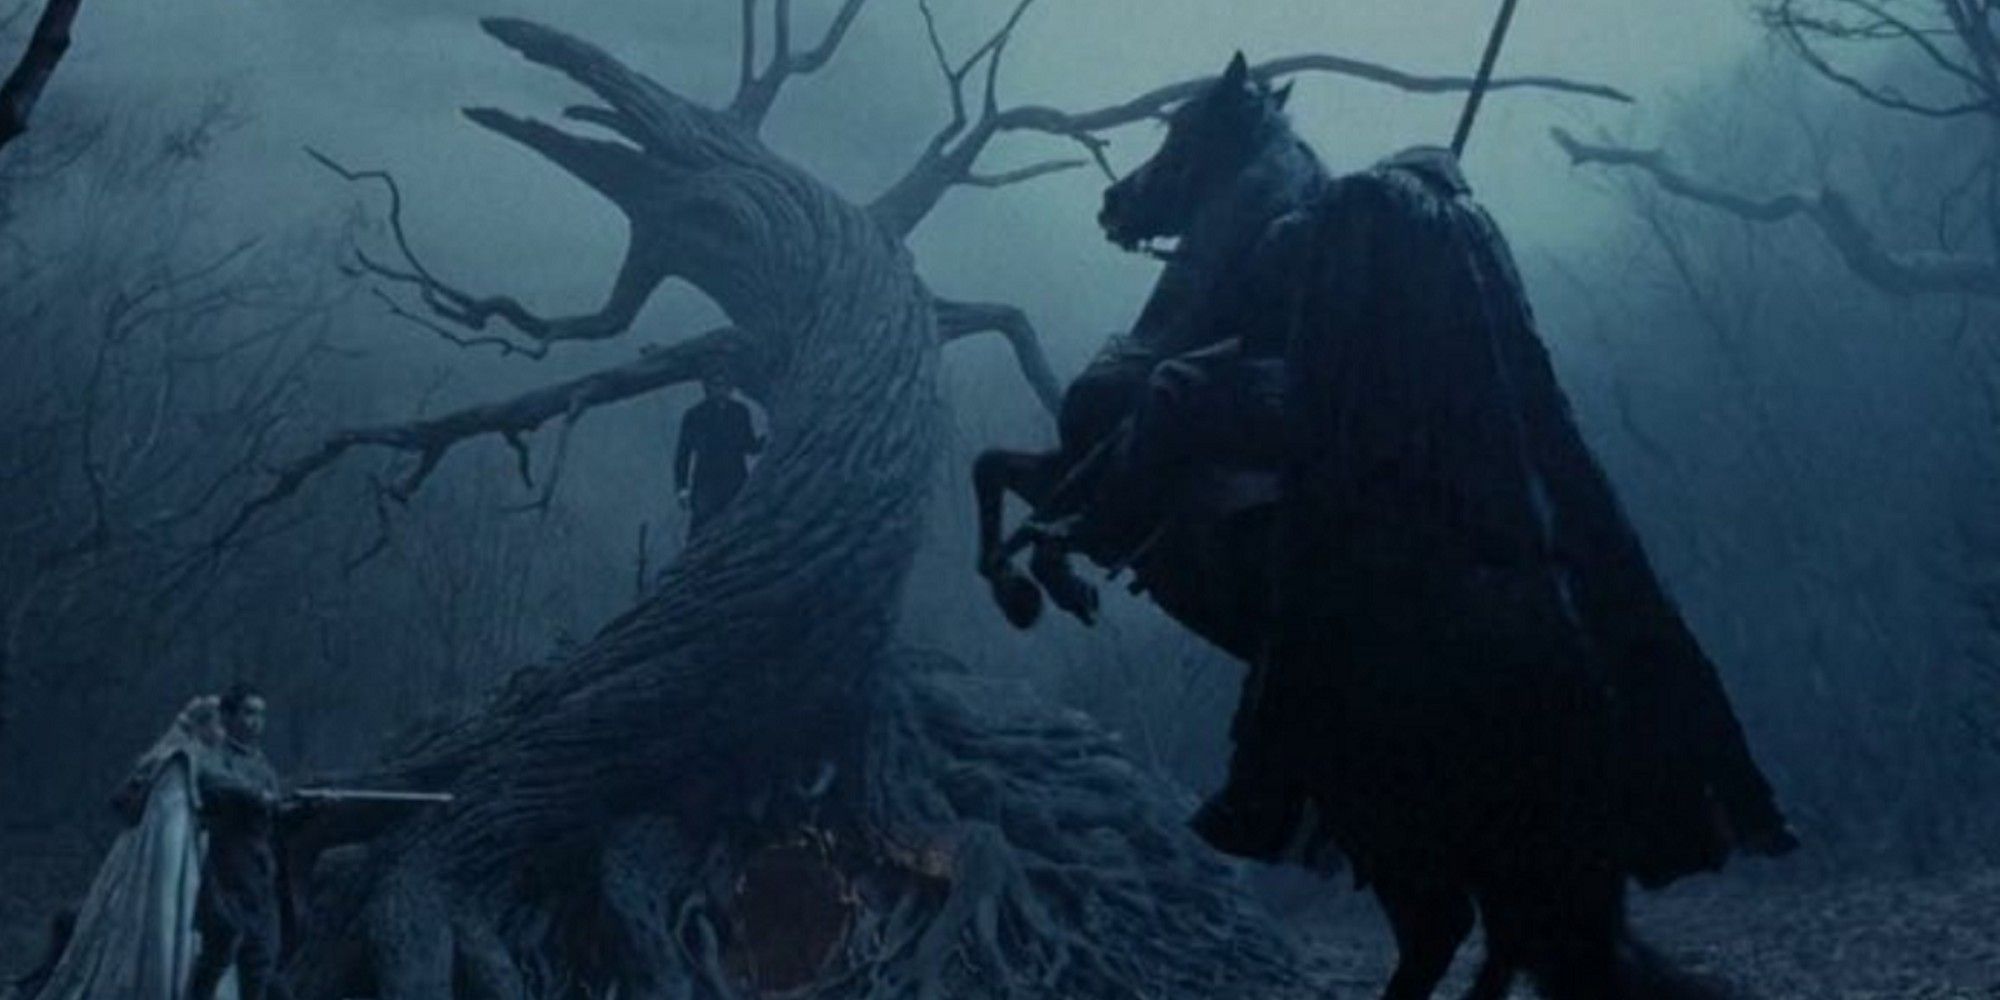 The Headless Horseman in front of the tree of the dead in Sleepy Hollow